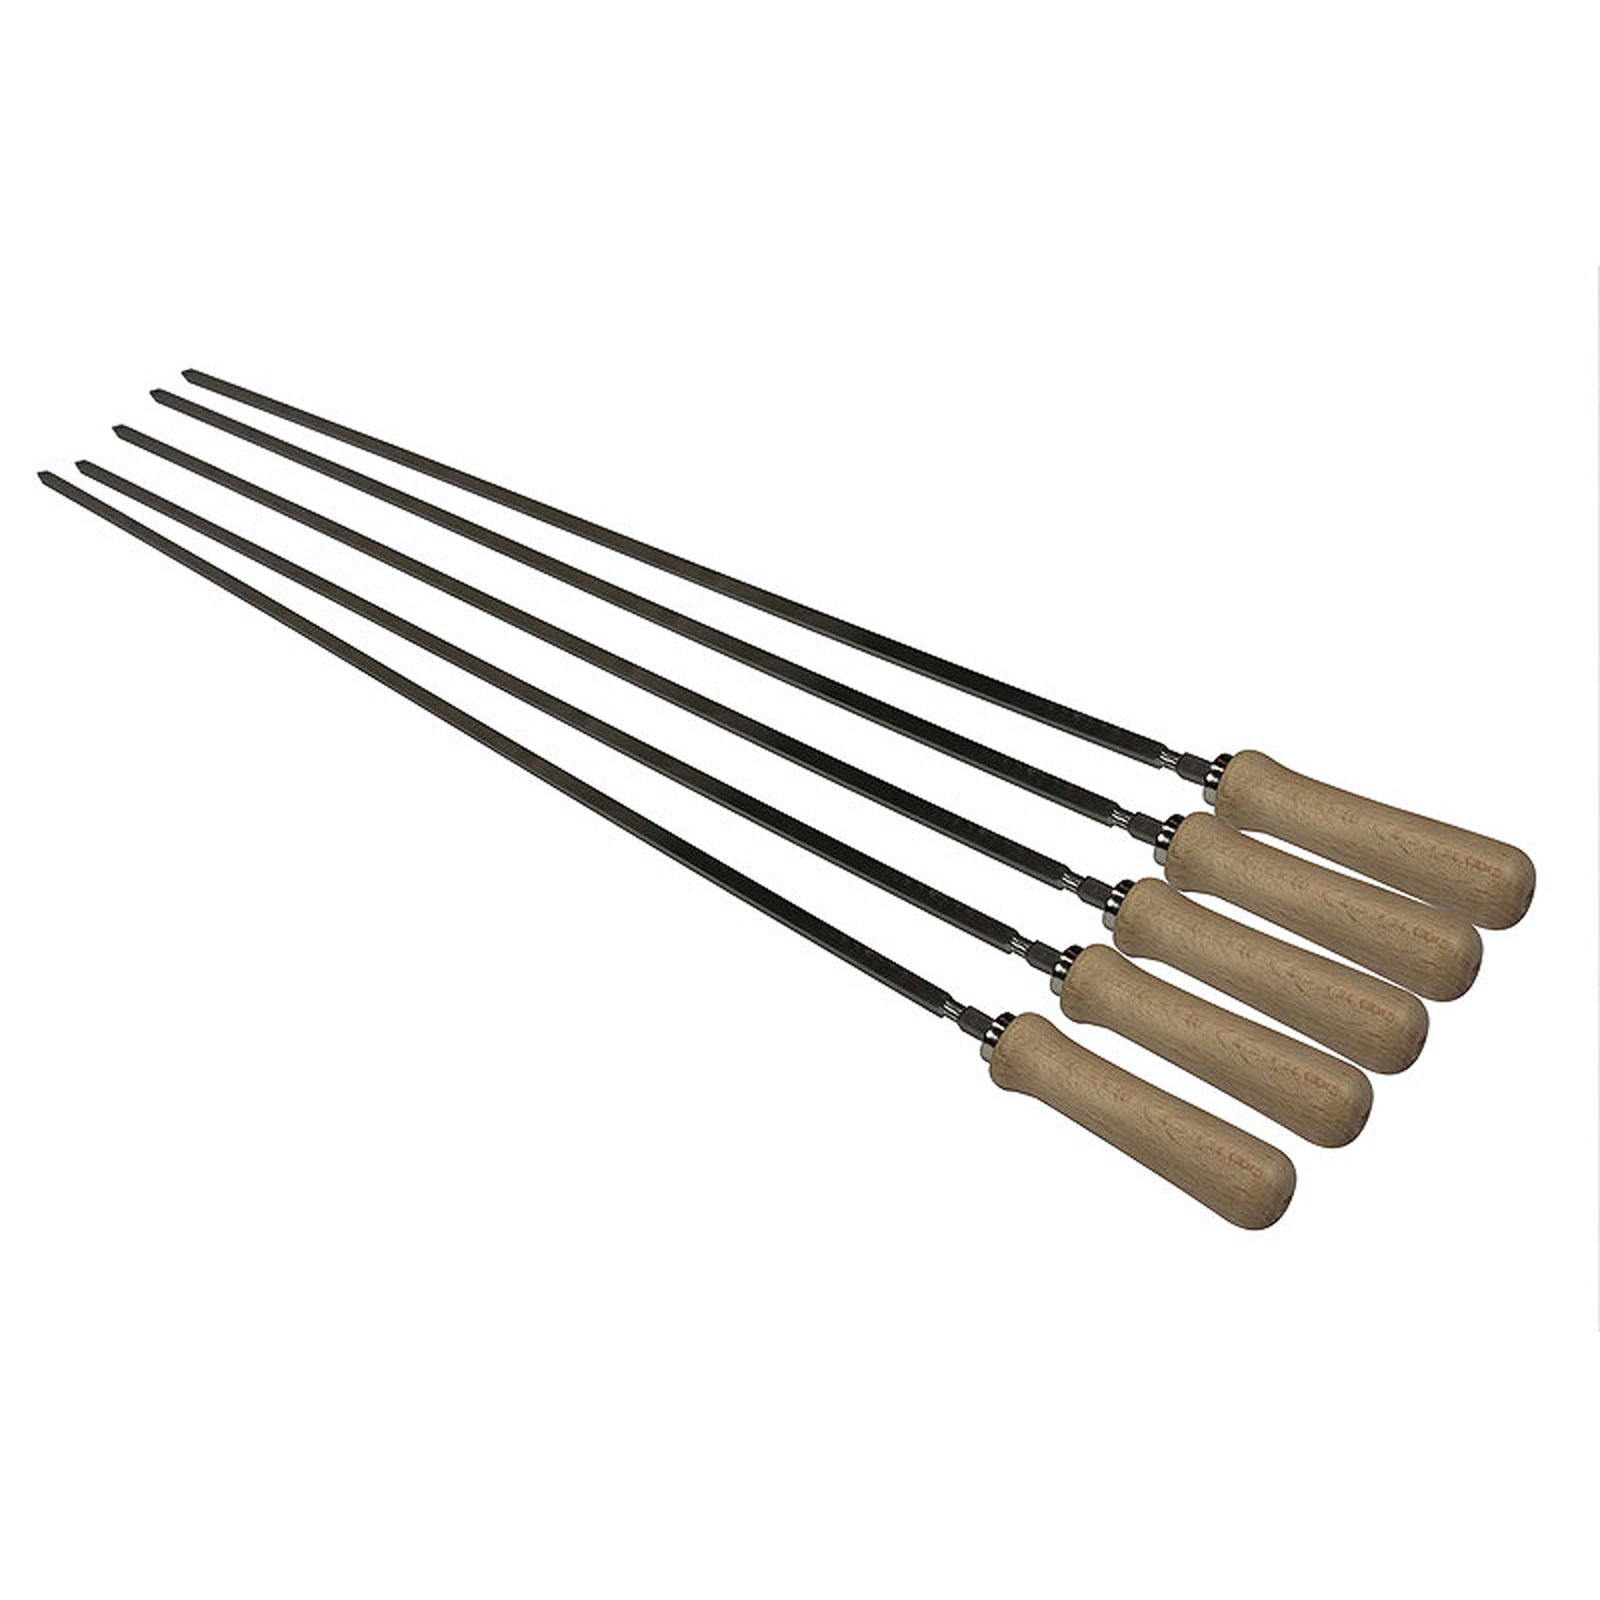 Cyprus Grill Set of 5 - Heavy Duty Large Skewer 86cm Long (Groove to Tip) for H/Duty 5x11 Spit Rotisserie 8mm thick - LSGS-2210A